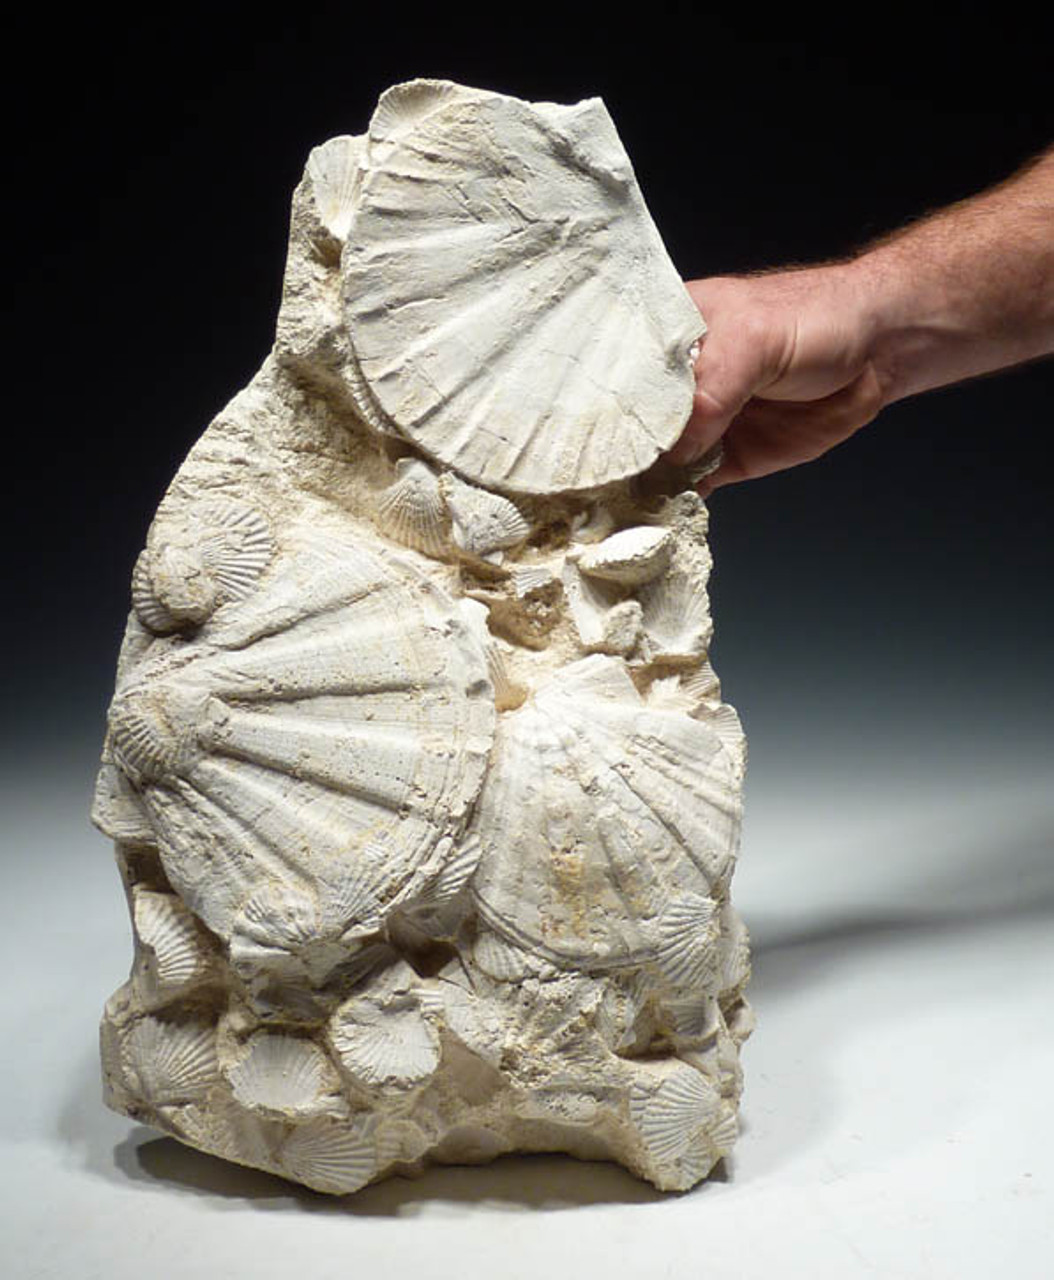 BIV017 - TOWERING FOSSIL GROUP OF PREHISTORIC MIOCENE GIANT SEA SCALLOPS WITH BABY SCALLOPS 